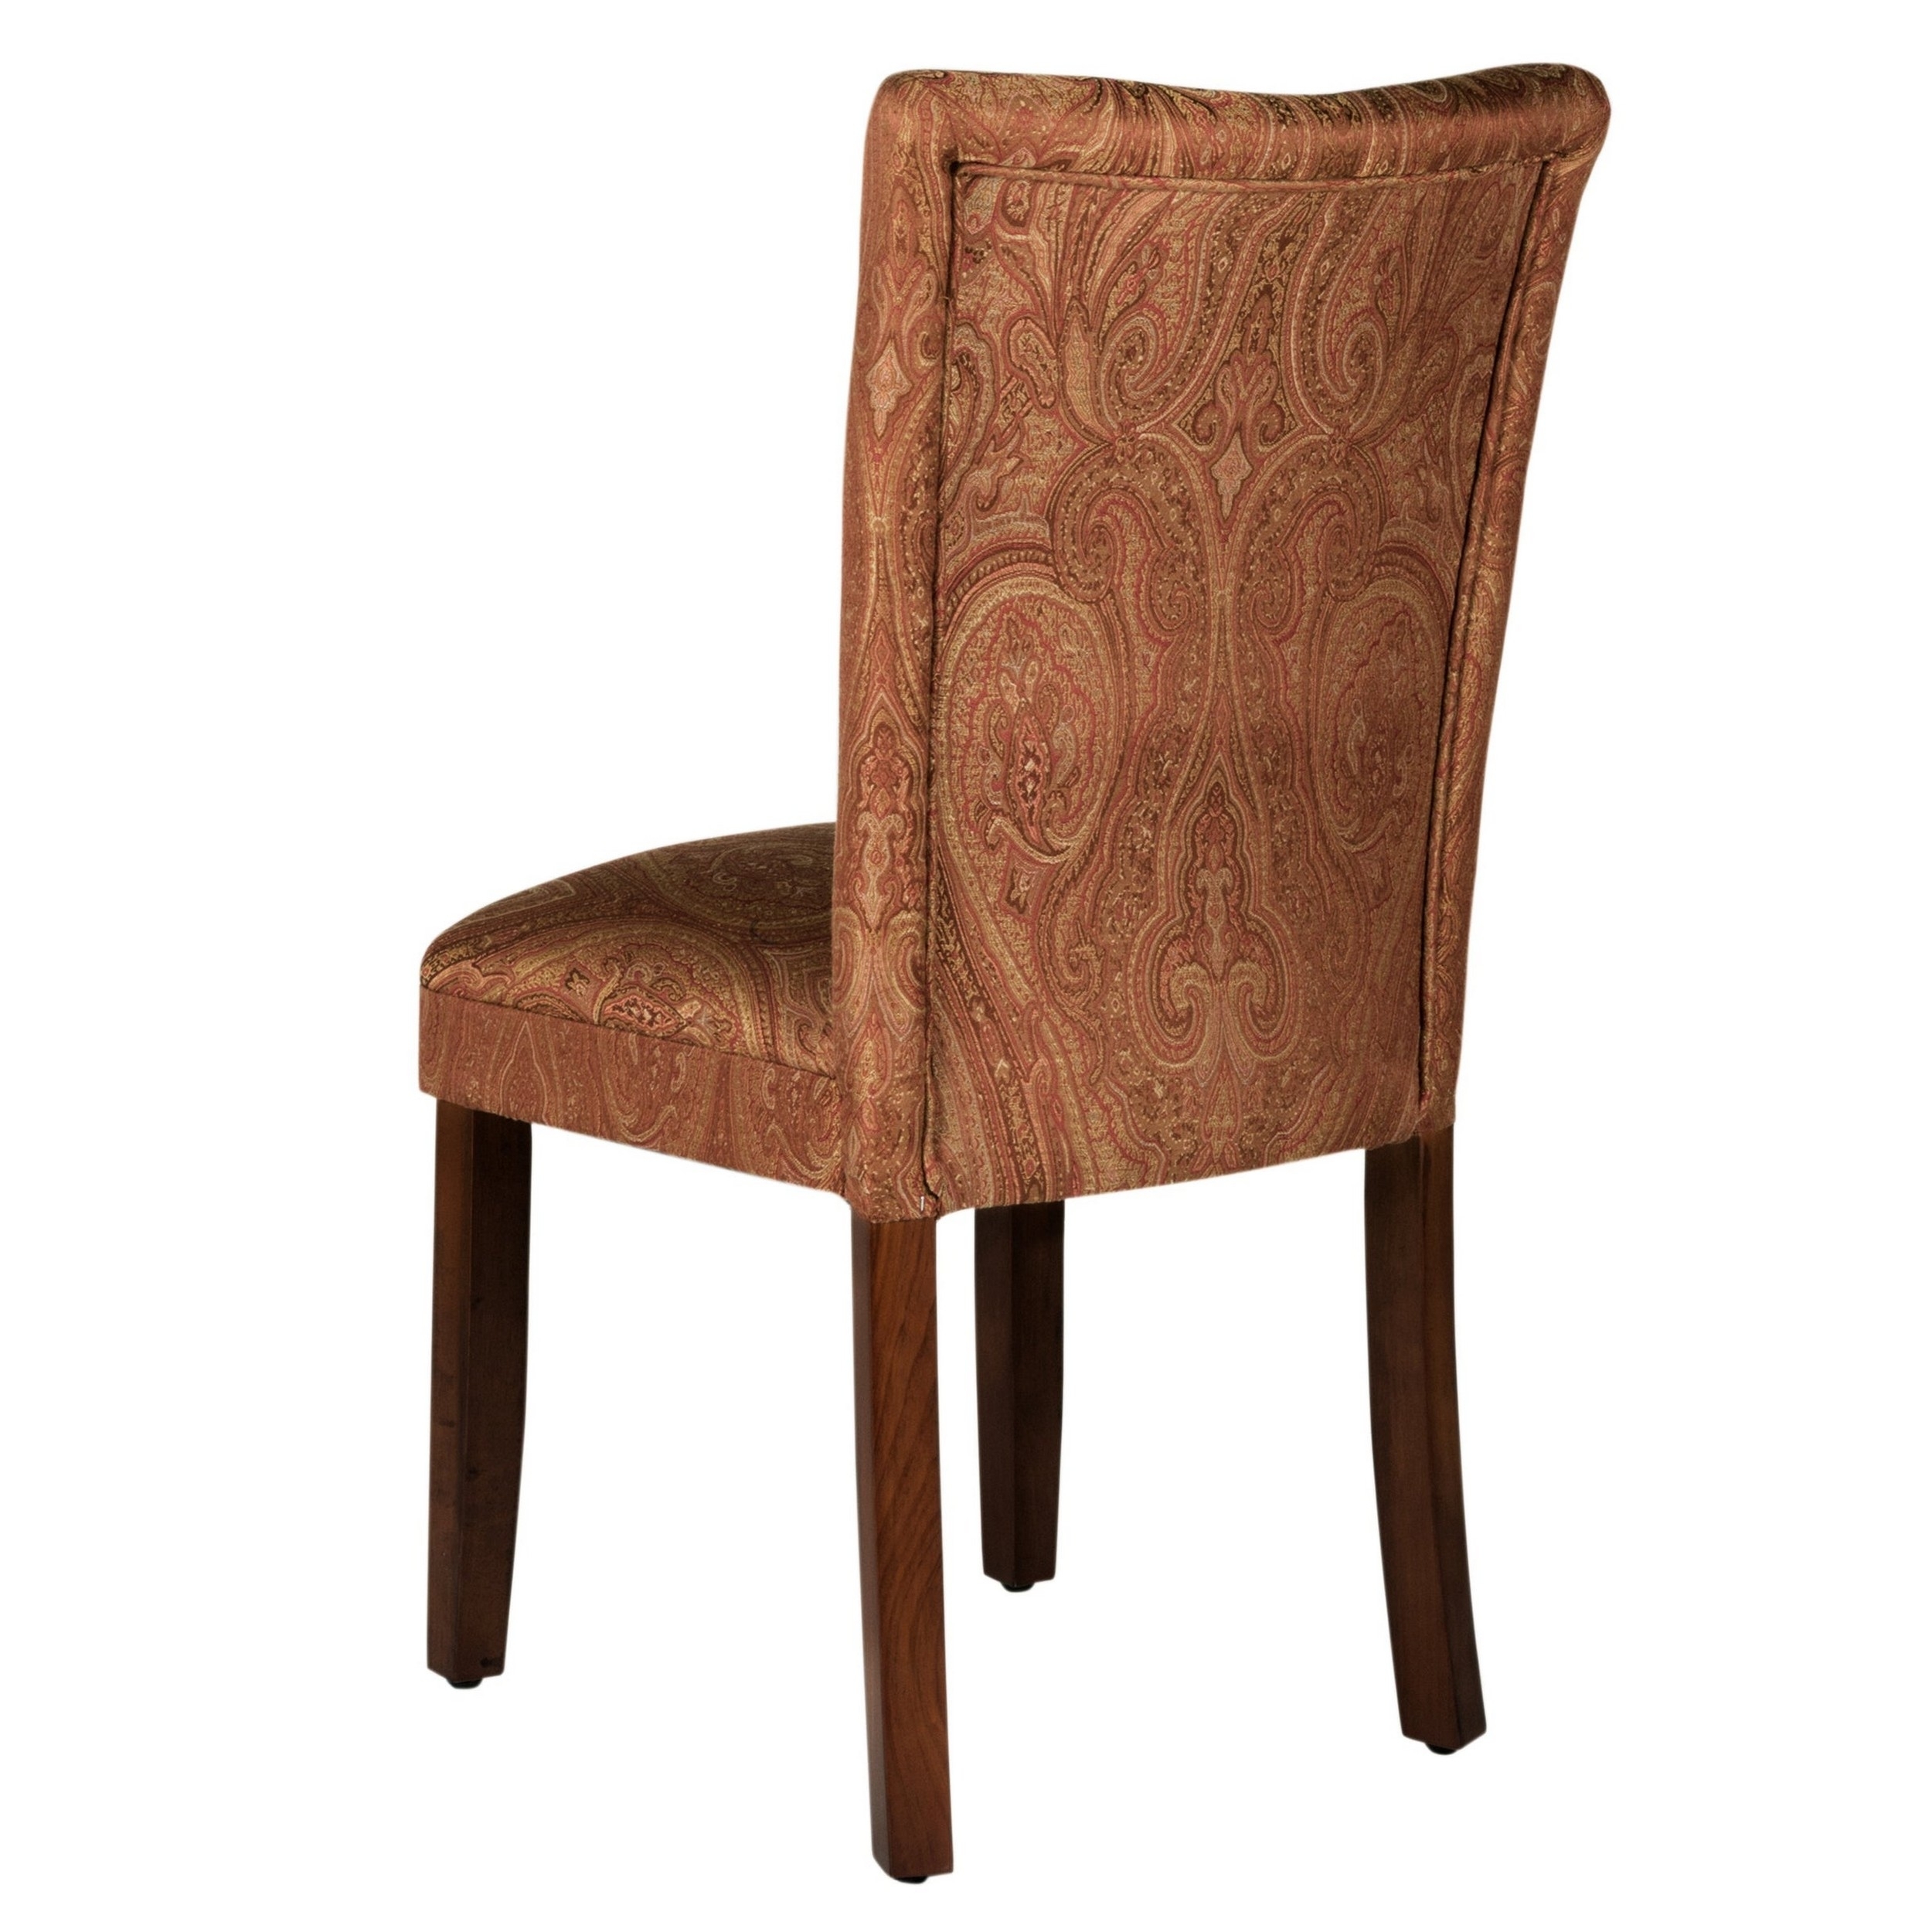 Damask Pattern Fabric Upholstered Dining Chair With Wood Legs, Multicolor- Saltoro Sherpi